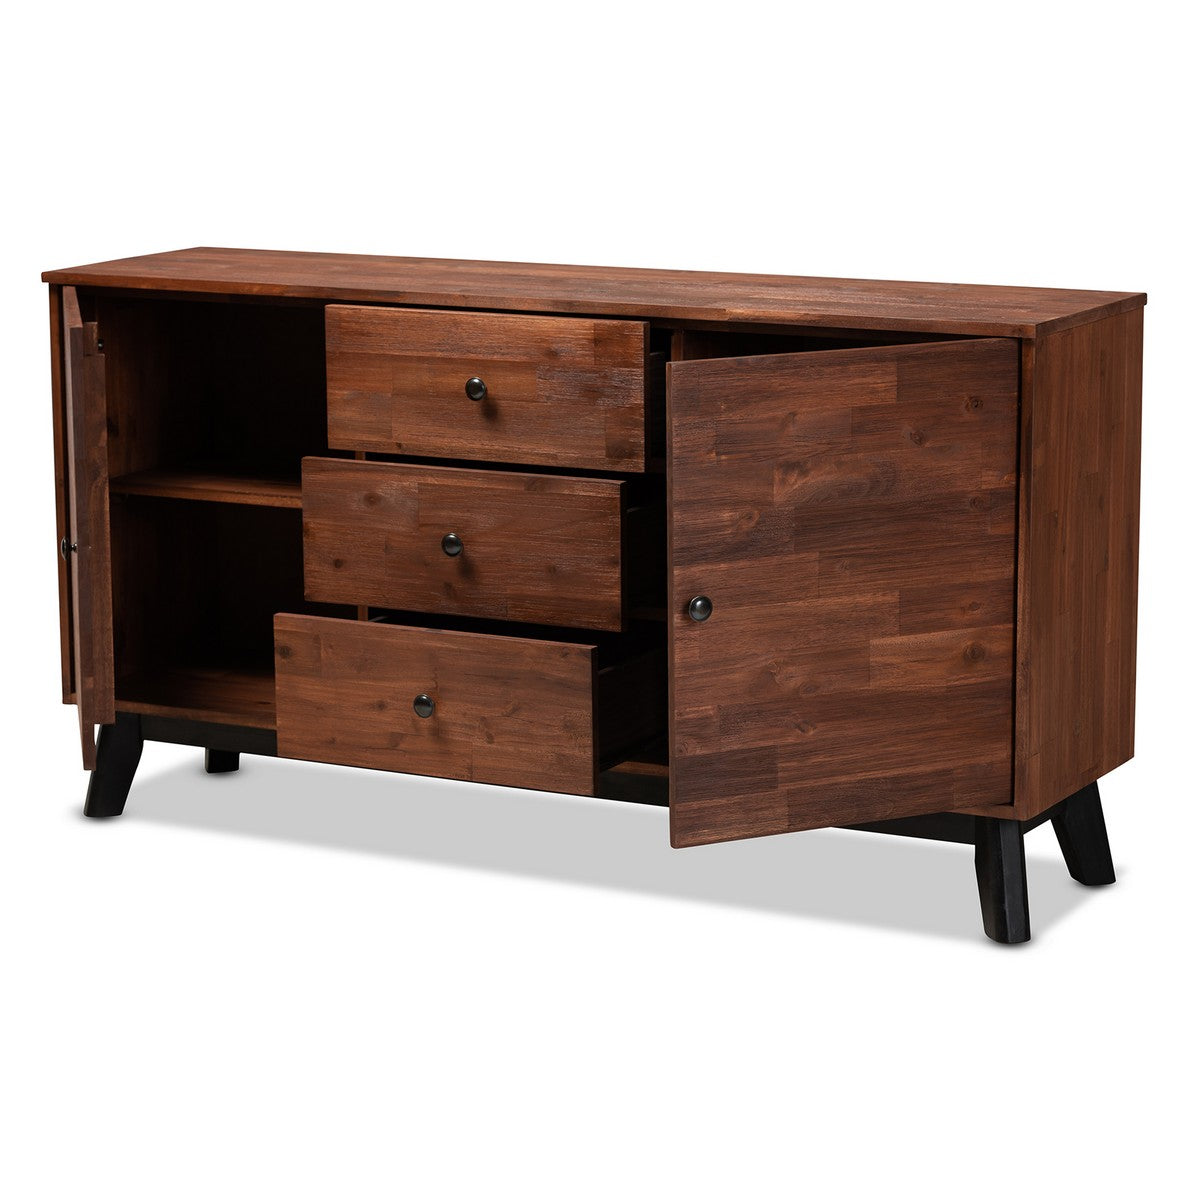 Baxton Studio Calla Modern and Contemporary Brown and Black Oak Finished 2-Door Wood Sideboard Buffet